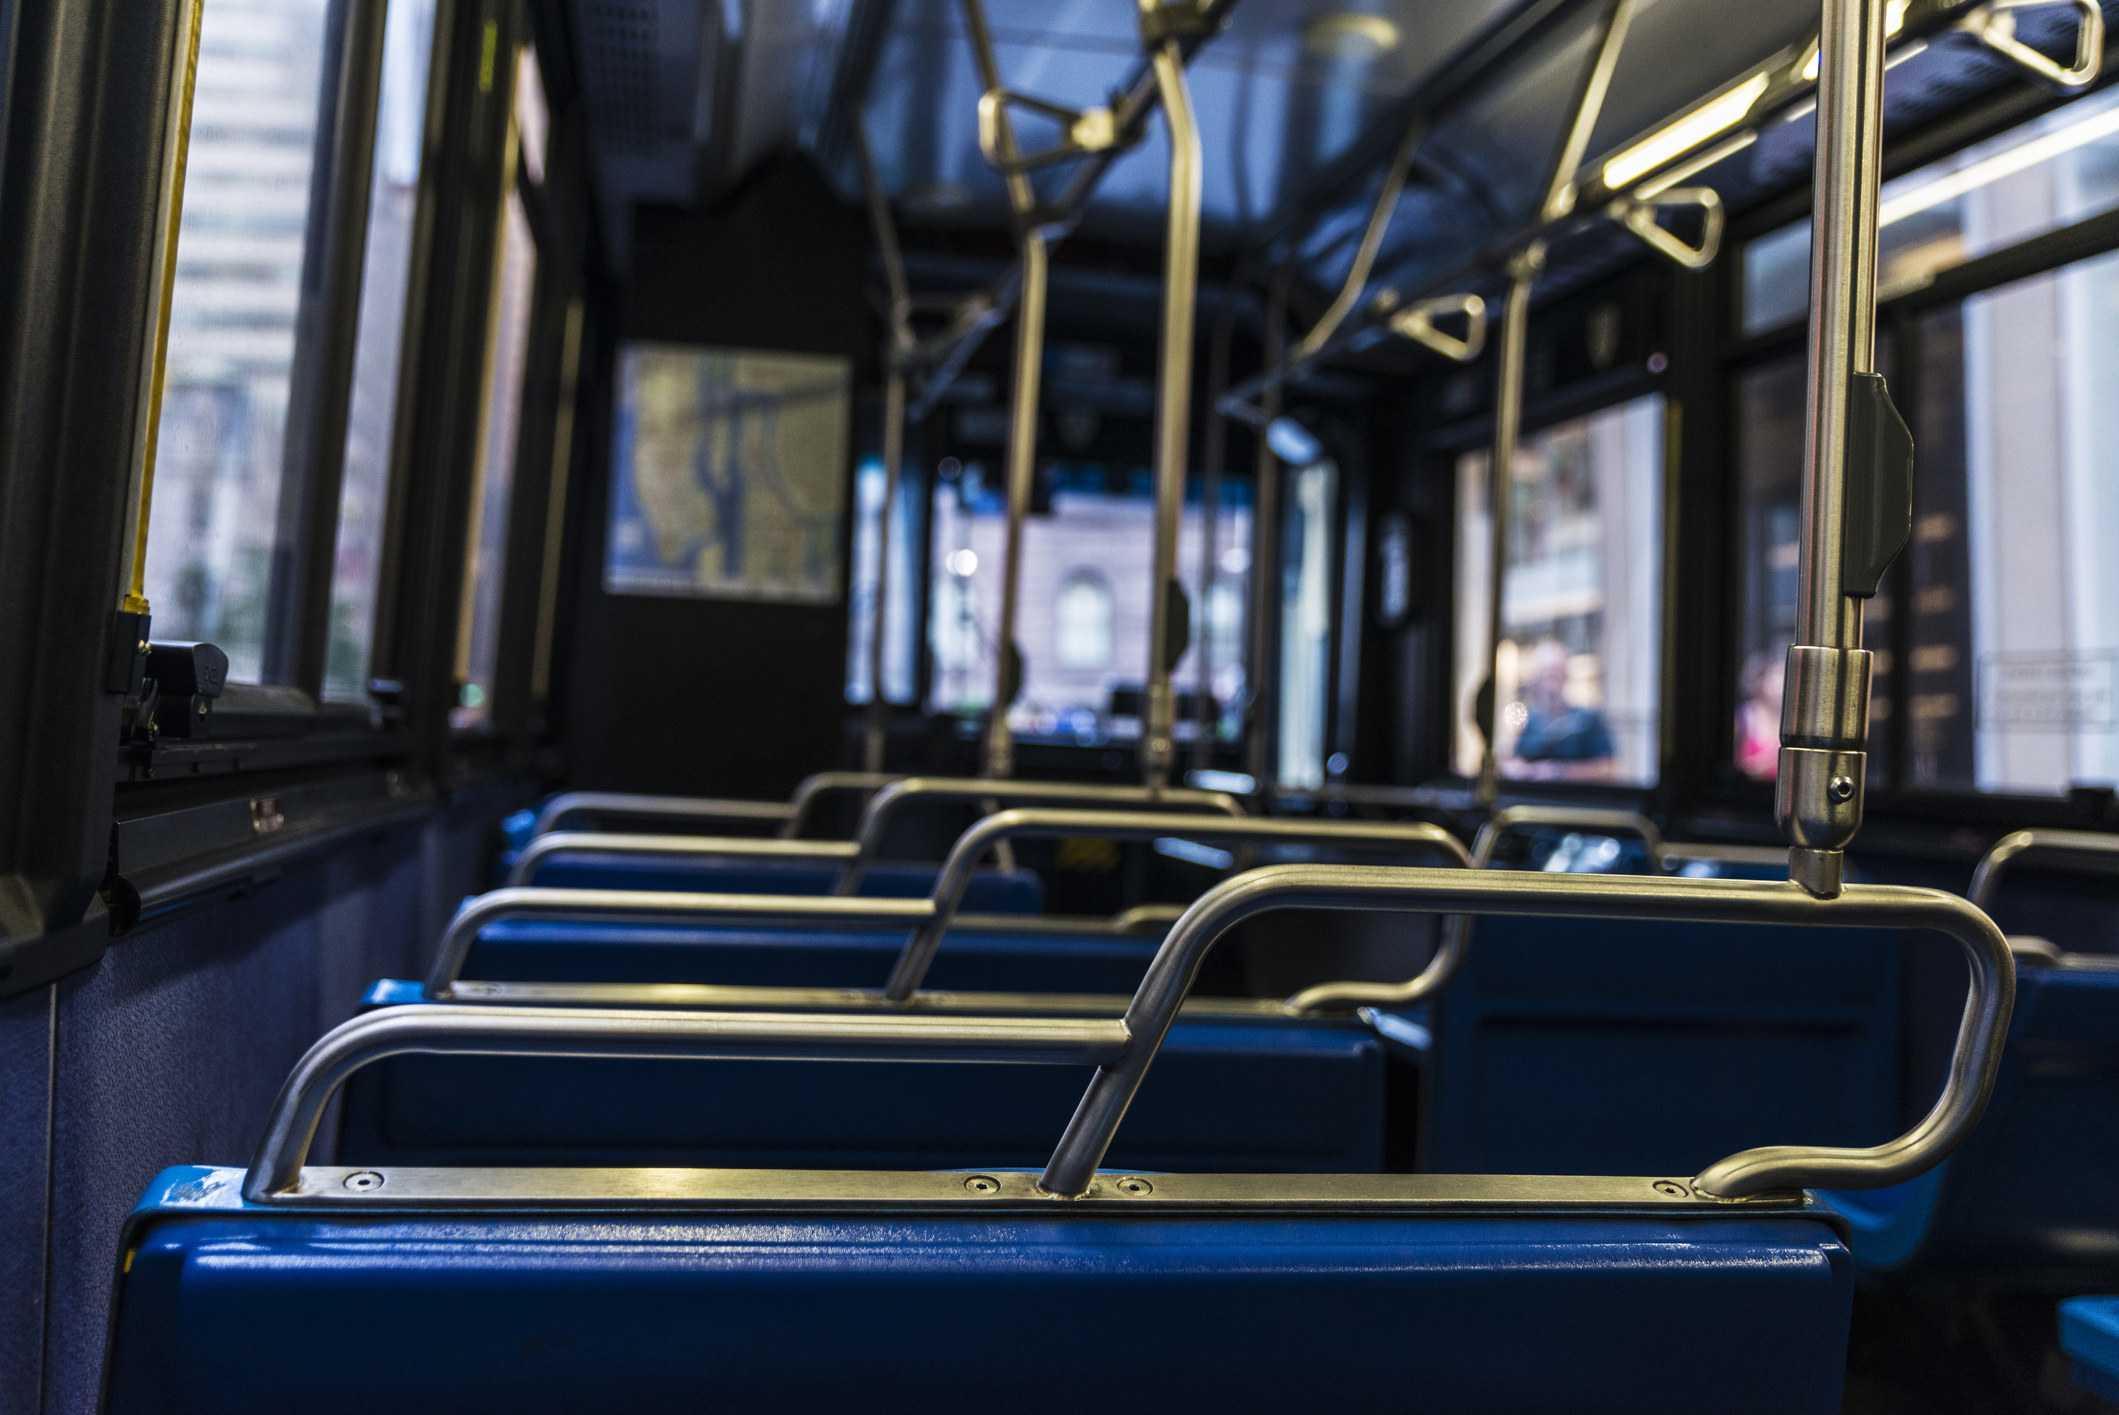 Empty blue seats with its metal handles inside a bus in New York